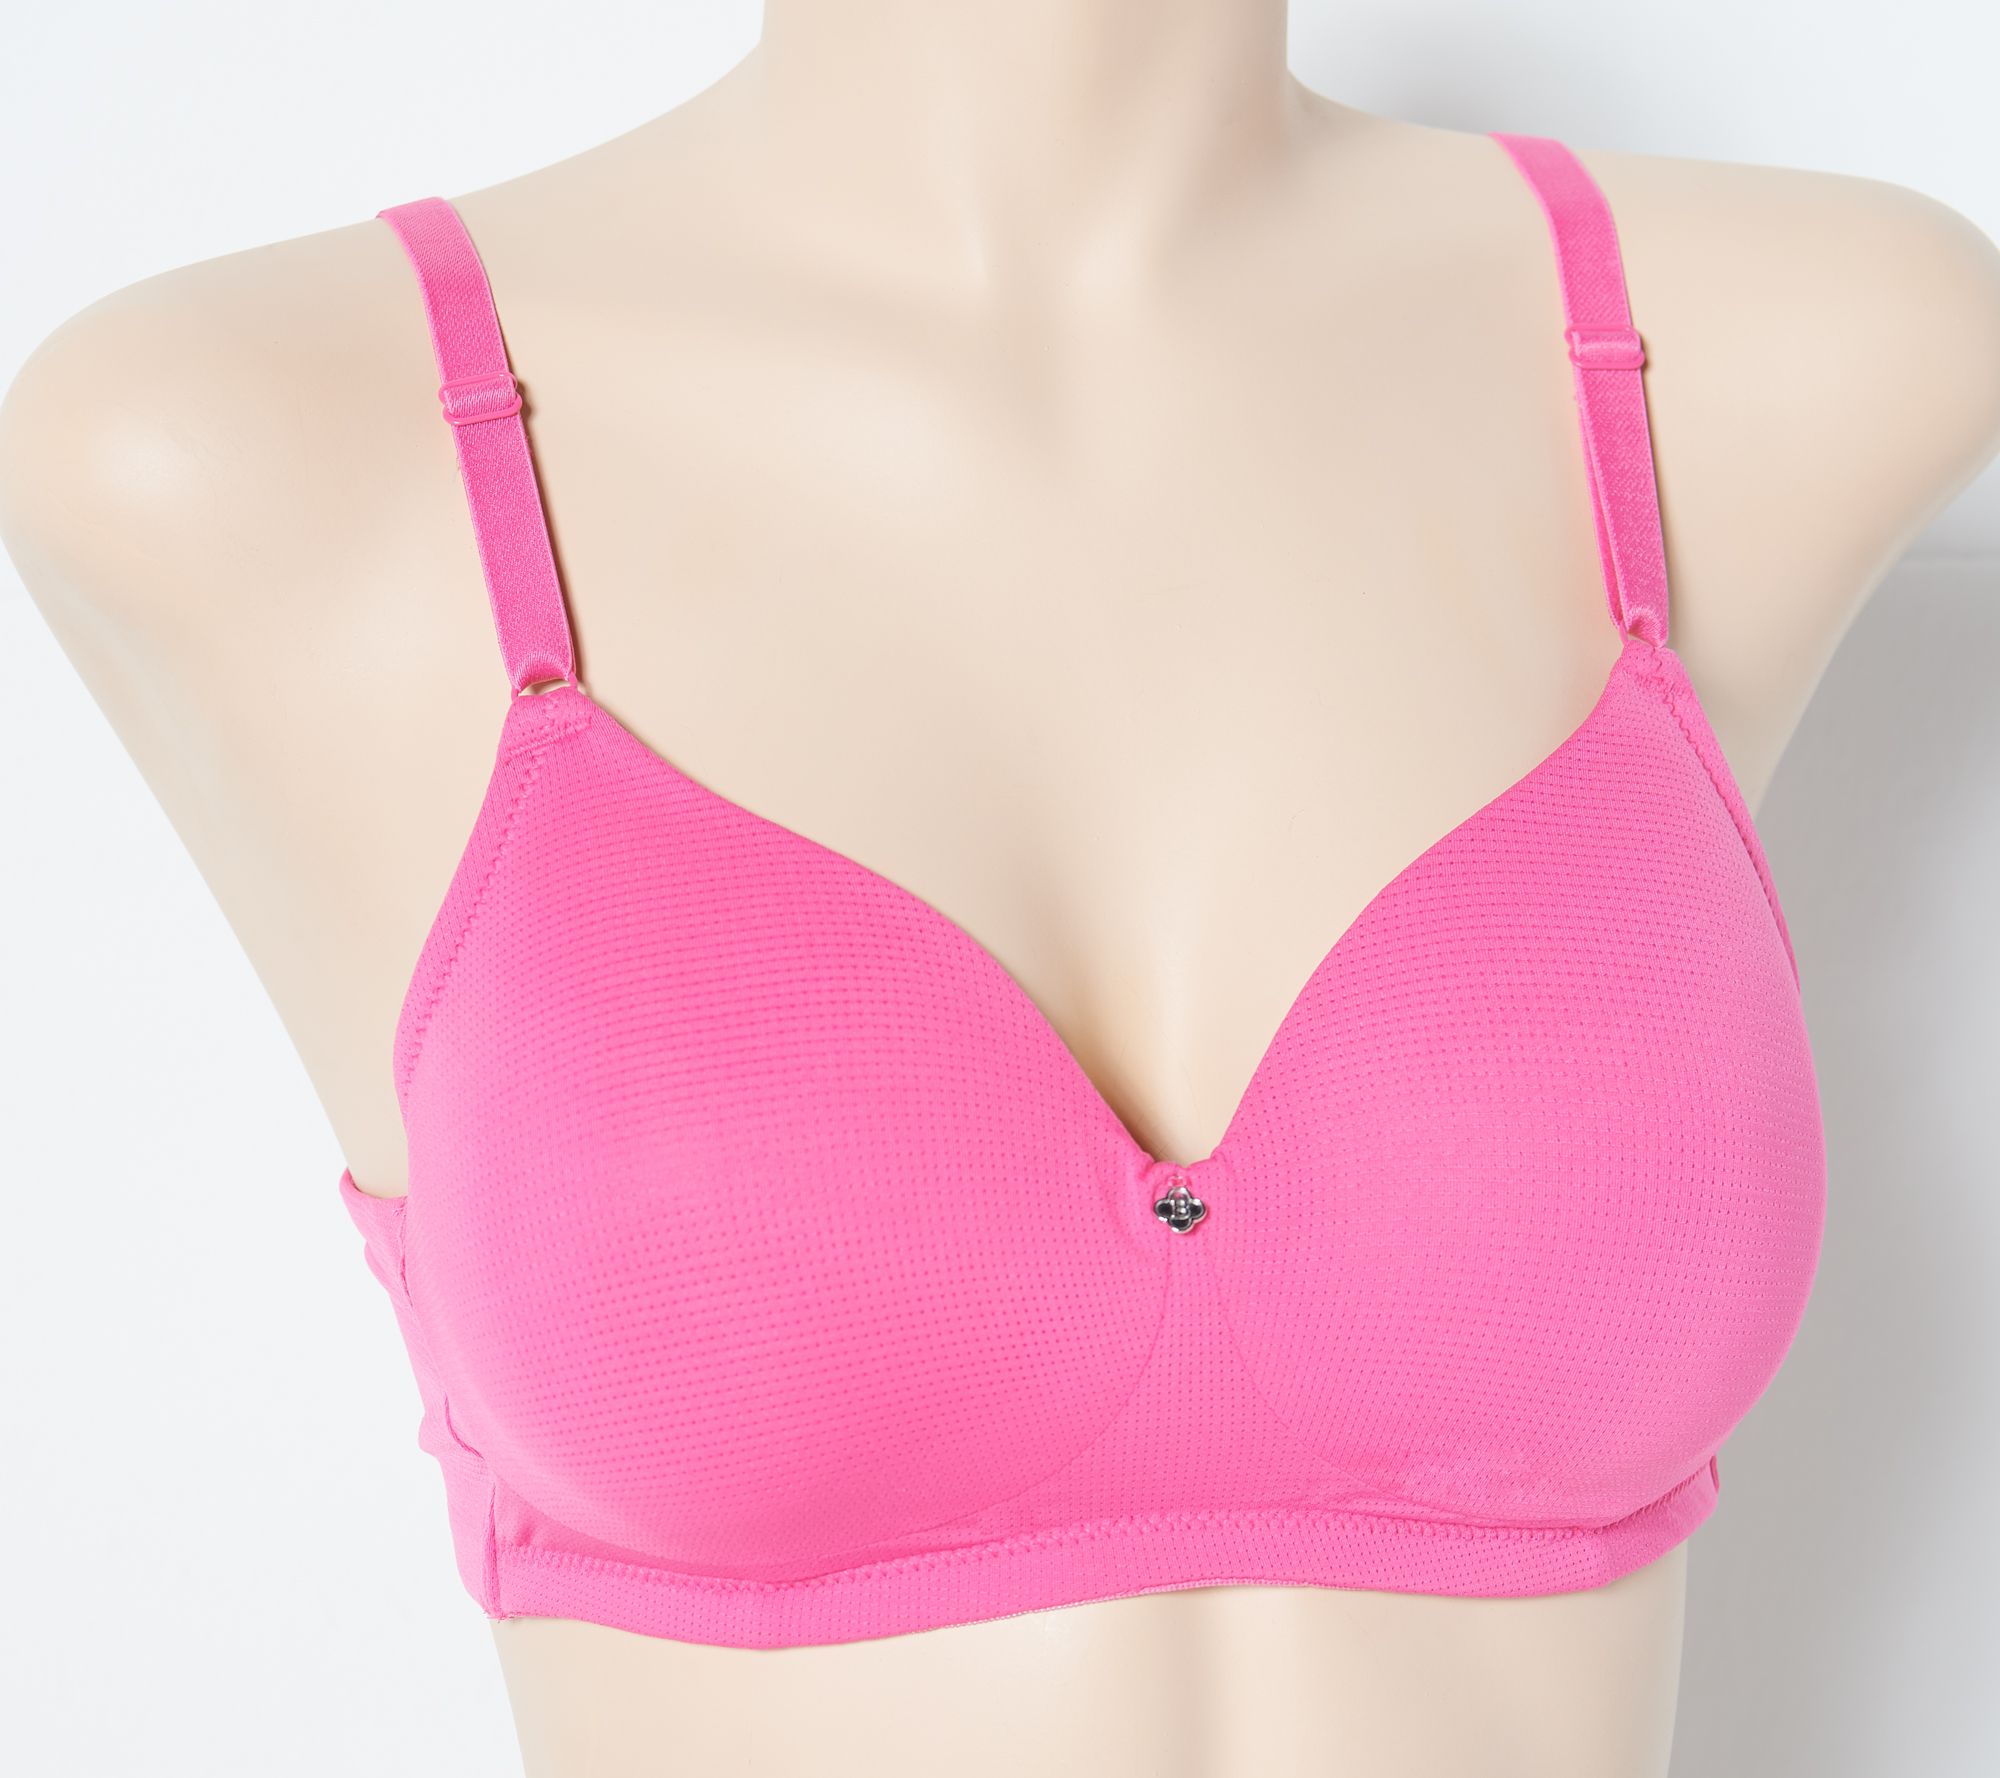 Breezies Lace Effects Full Coverage Seamless Underwire Bra - QVC.com